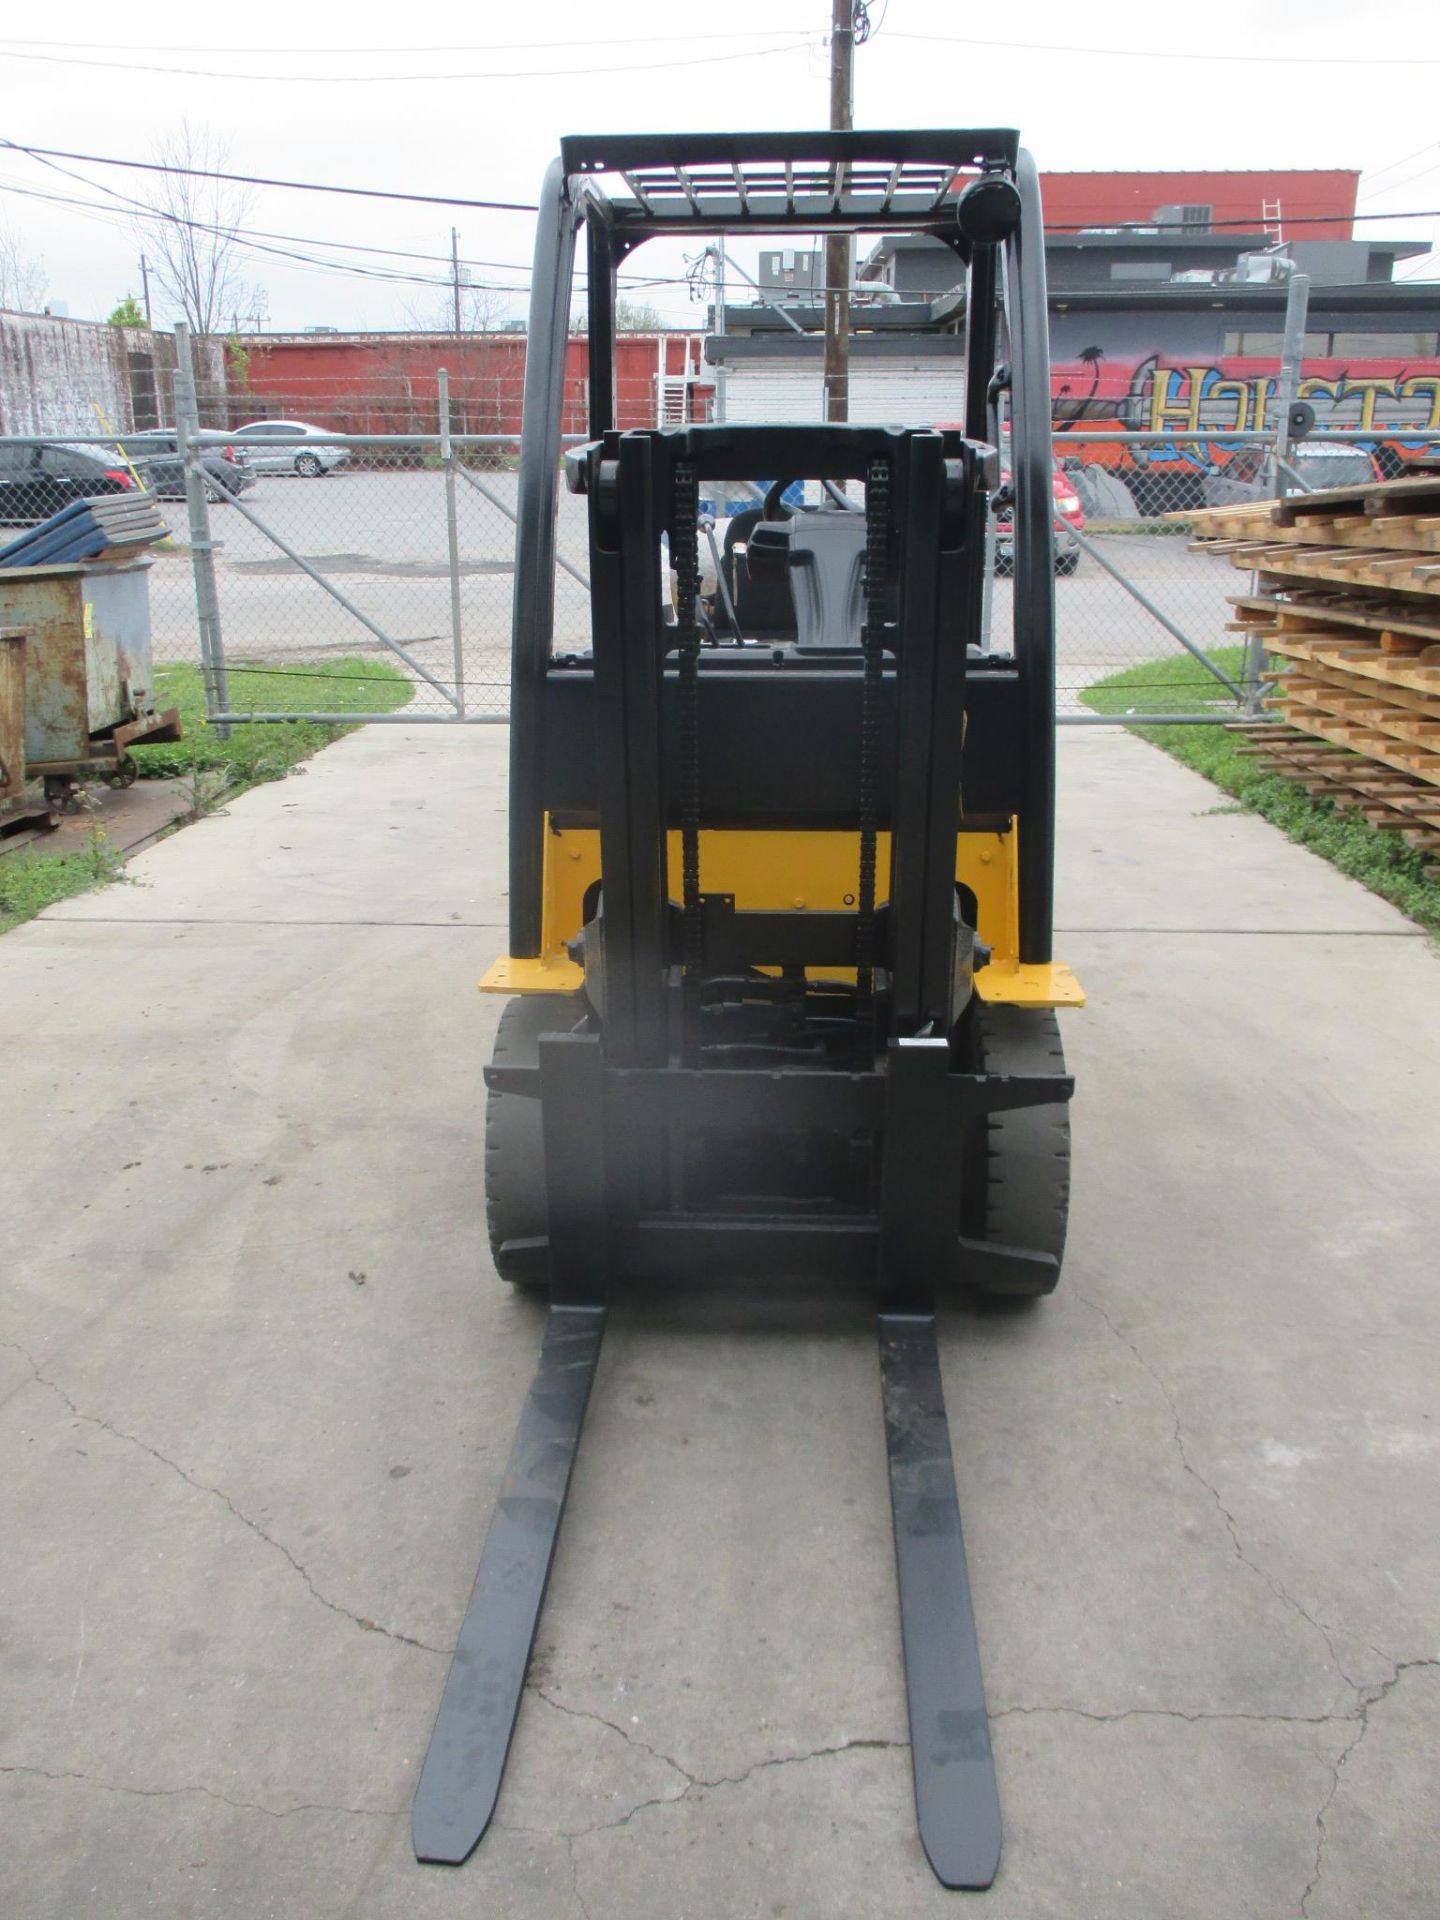 FORKLIFT, YALE 4,000 LB. CAP. MDL. GLP040, new 2008, LPG, 2-stage mast, 84" max. lift ht., pneu. - Image 2 of 4